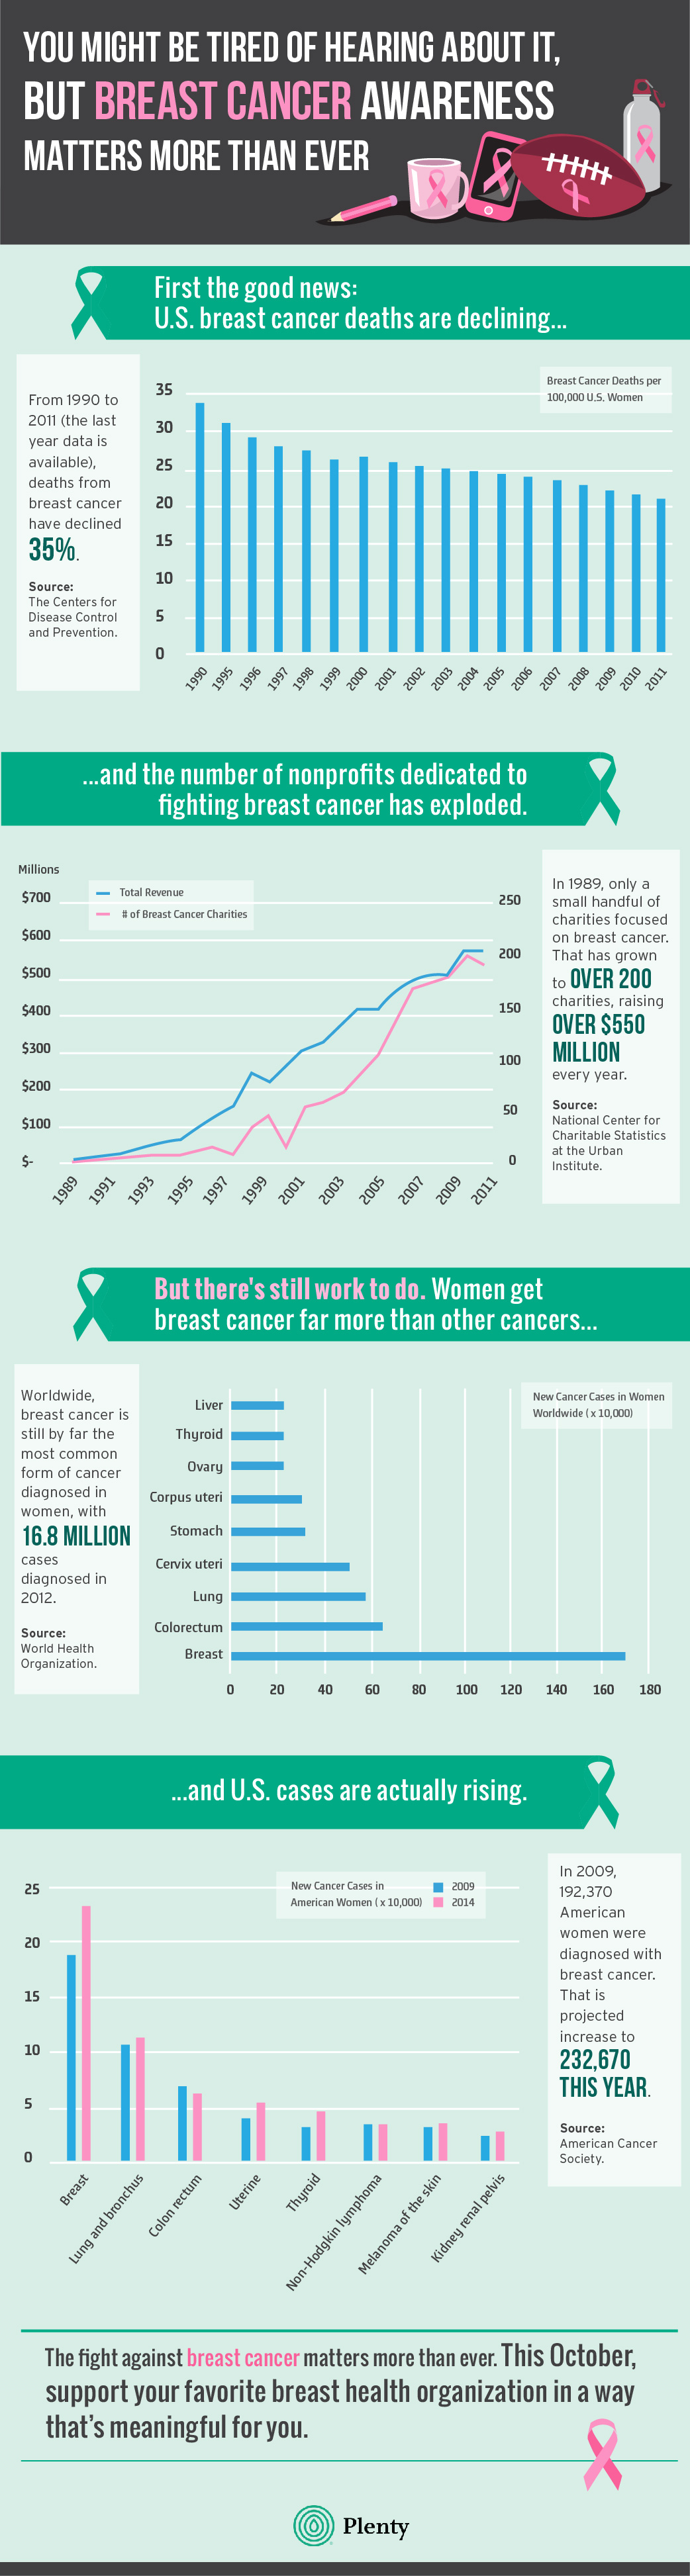 why-breast-cancer-awareness-matters-more-than-ever